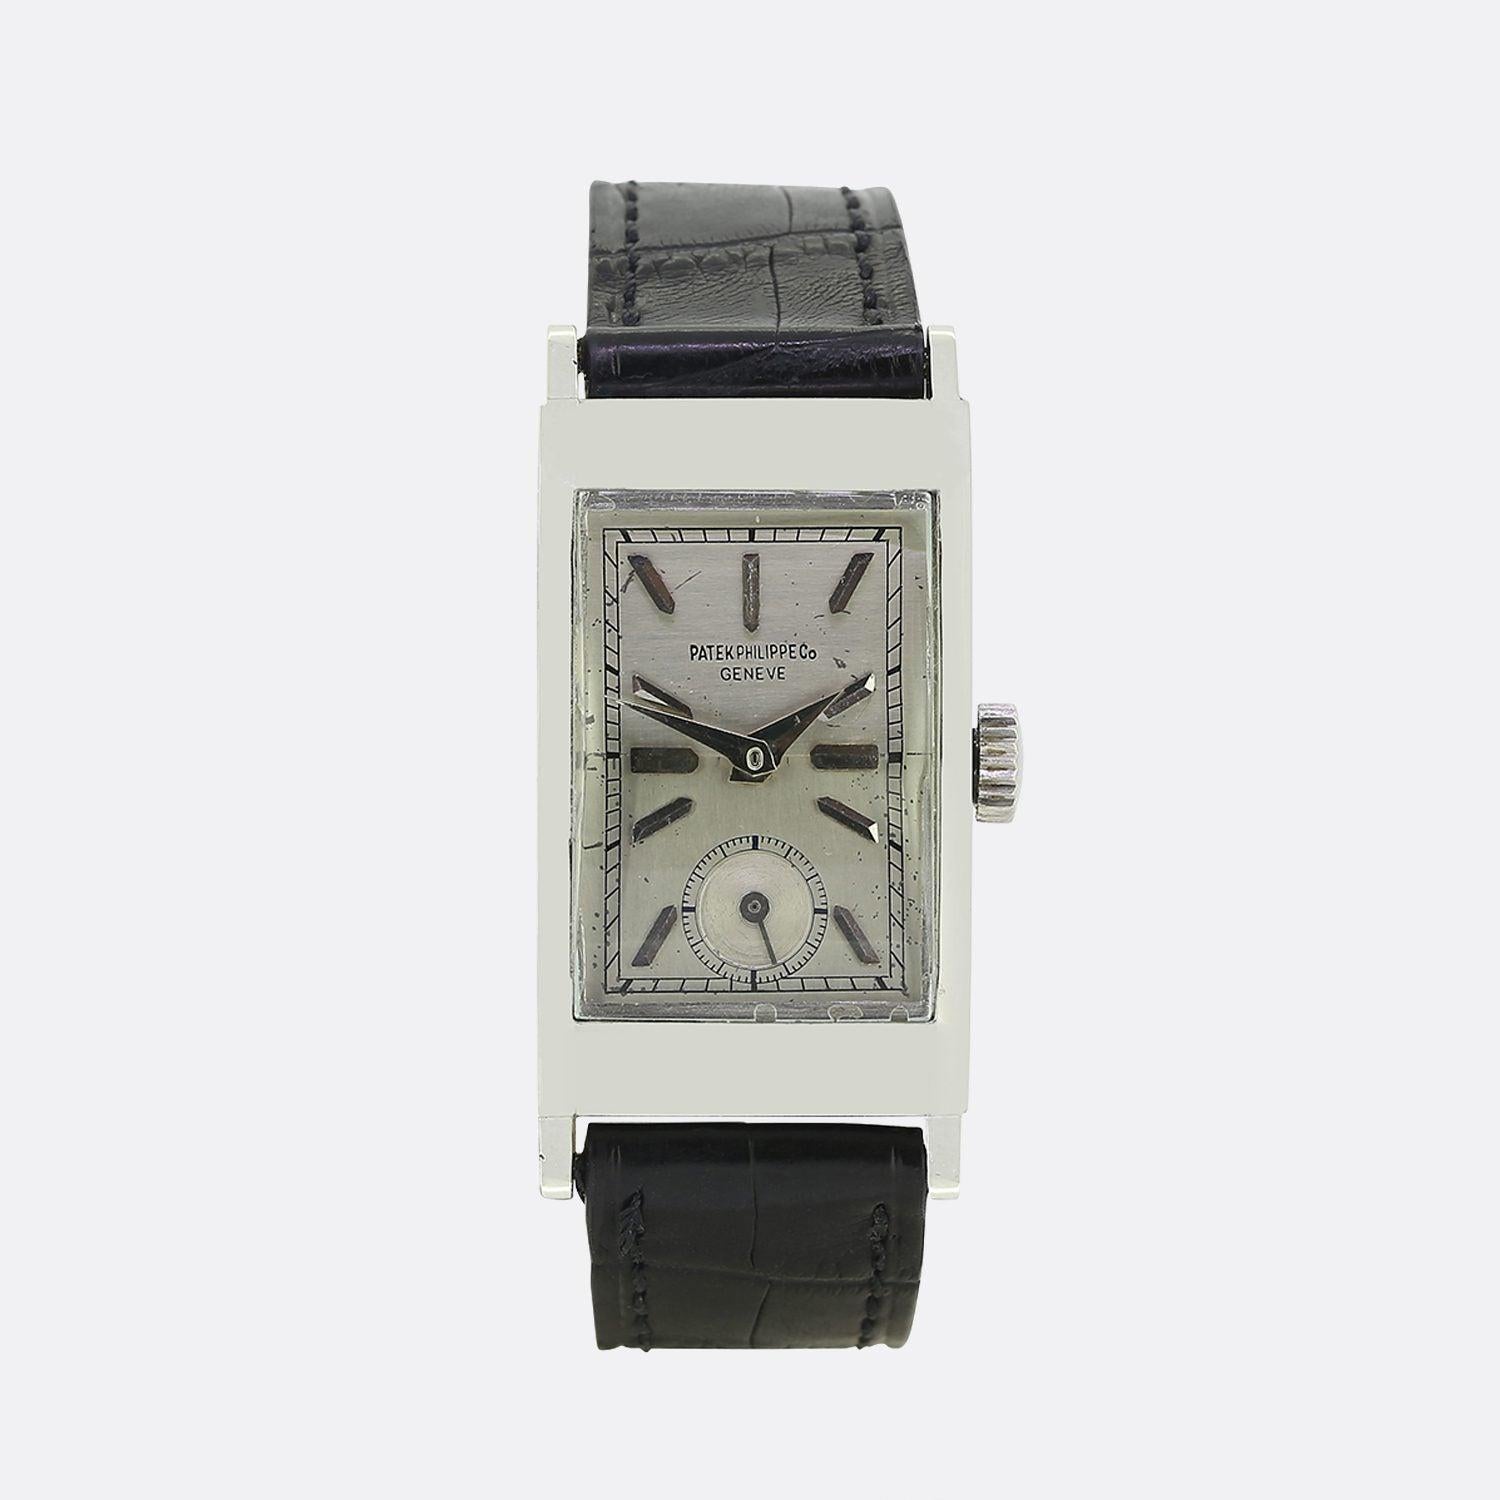 This is a wonderful and rare 1940s gents Patek Philippe wristwatch. The watch features a silver dial with white hour and minute hands and a seconds subdial at 6 o'clock. The watch has been finished with a new black leather strap and an 18ct gold